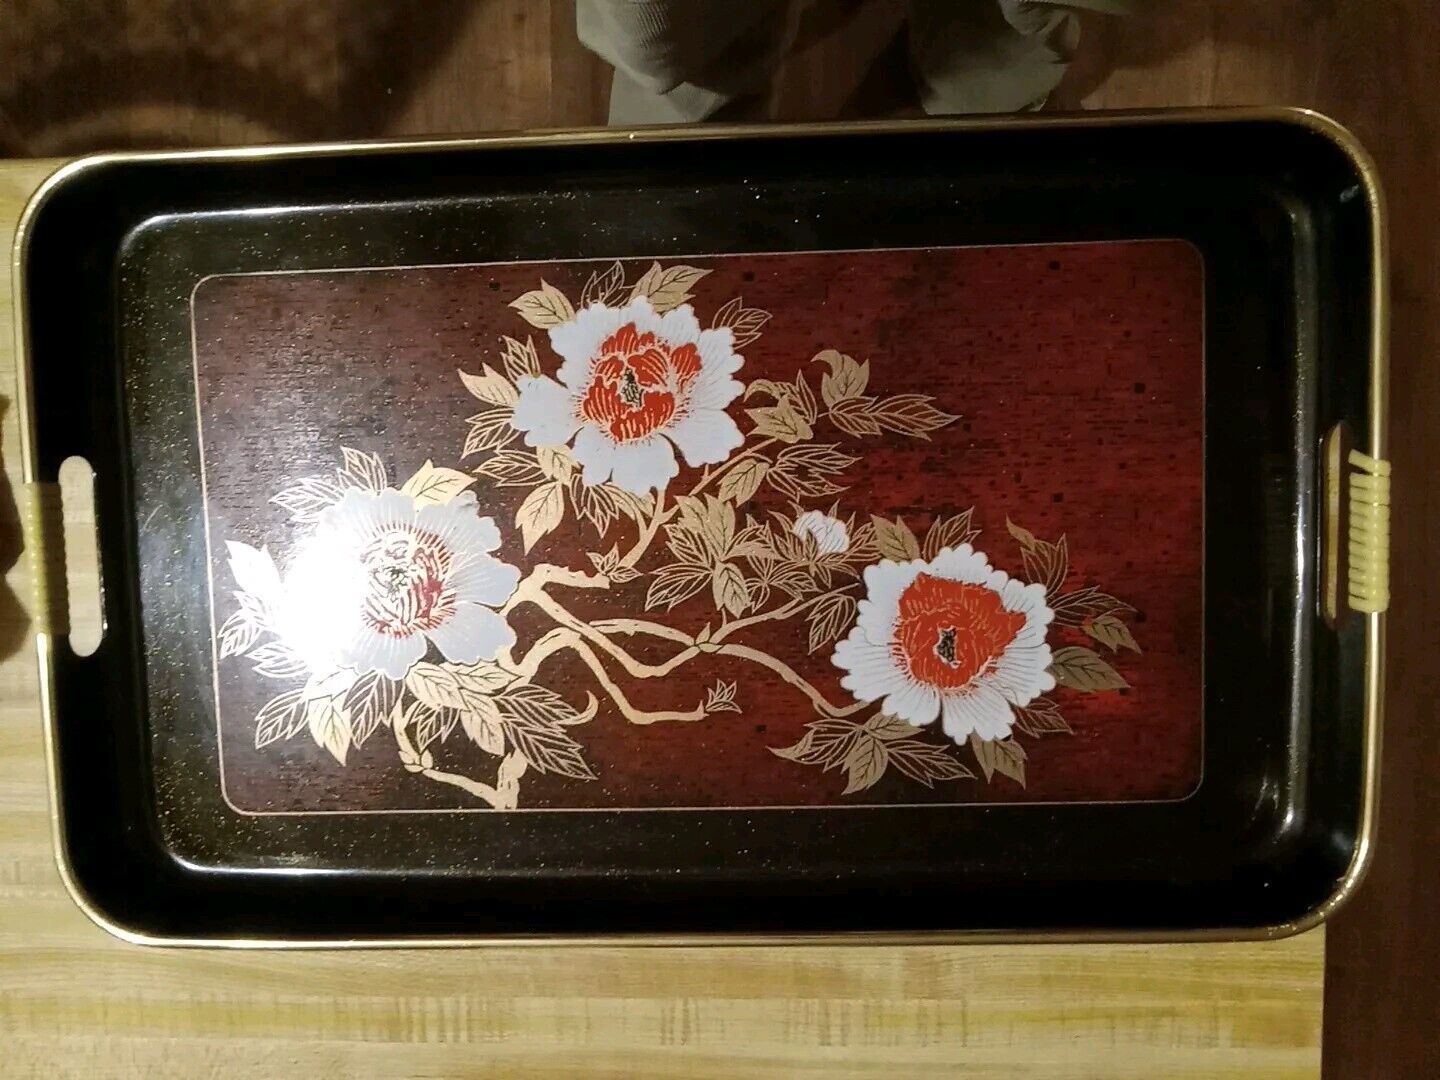 VINTAGE JAPANESE BLACK LACQUER TRAY 19 X 11 1/2 X 1 PEONY FLOWERS GOLD SPARKLE